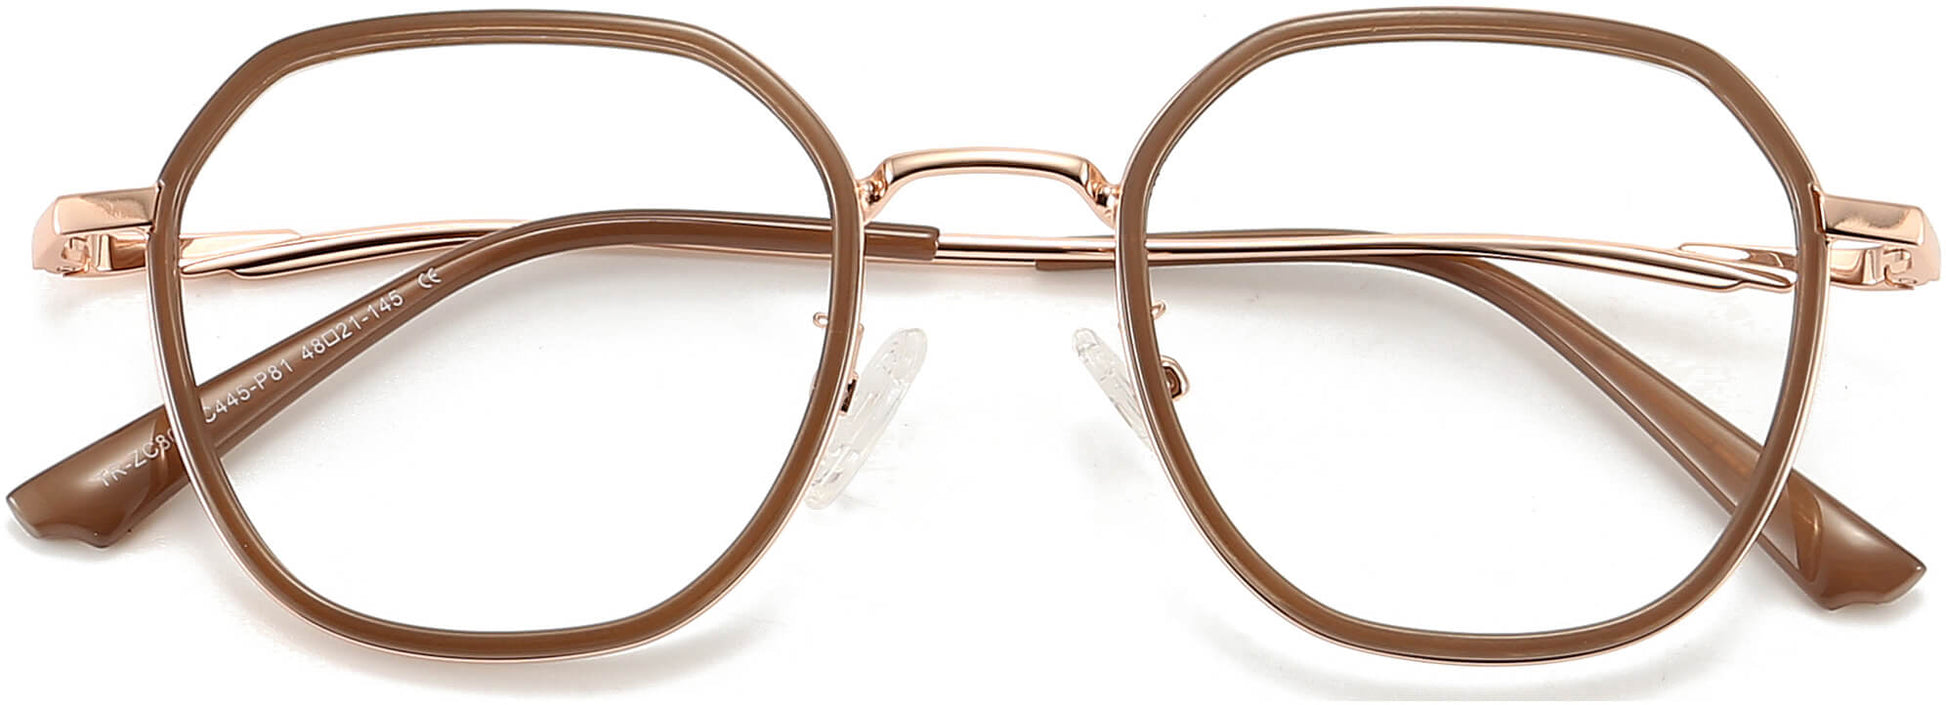 Maddison Square Brown Eyeglasses from ANRRI, closed view